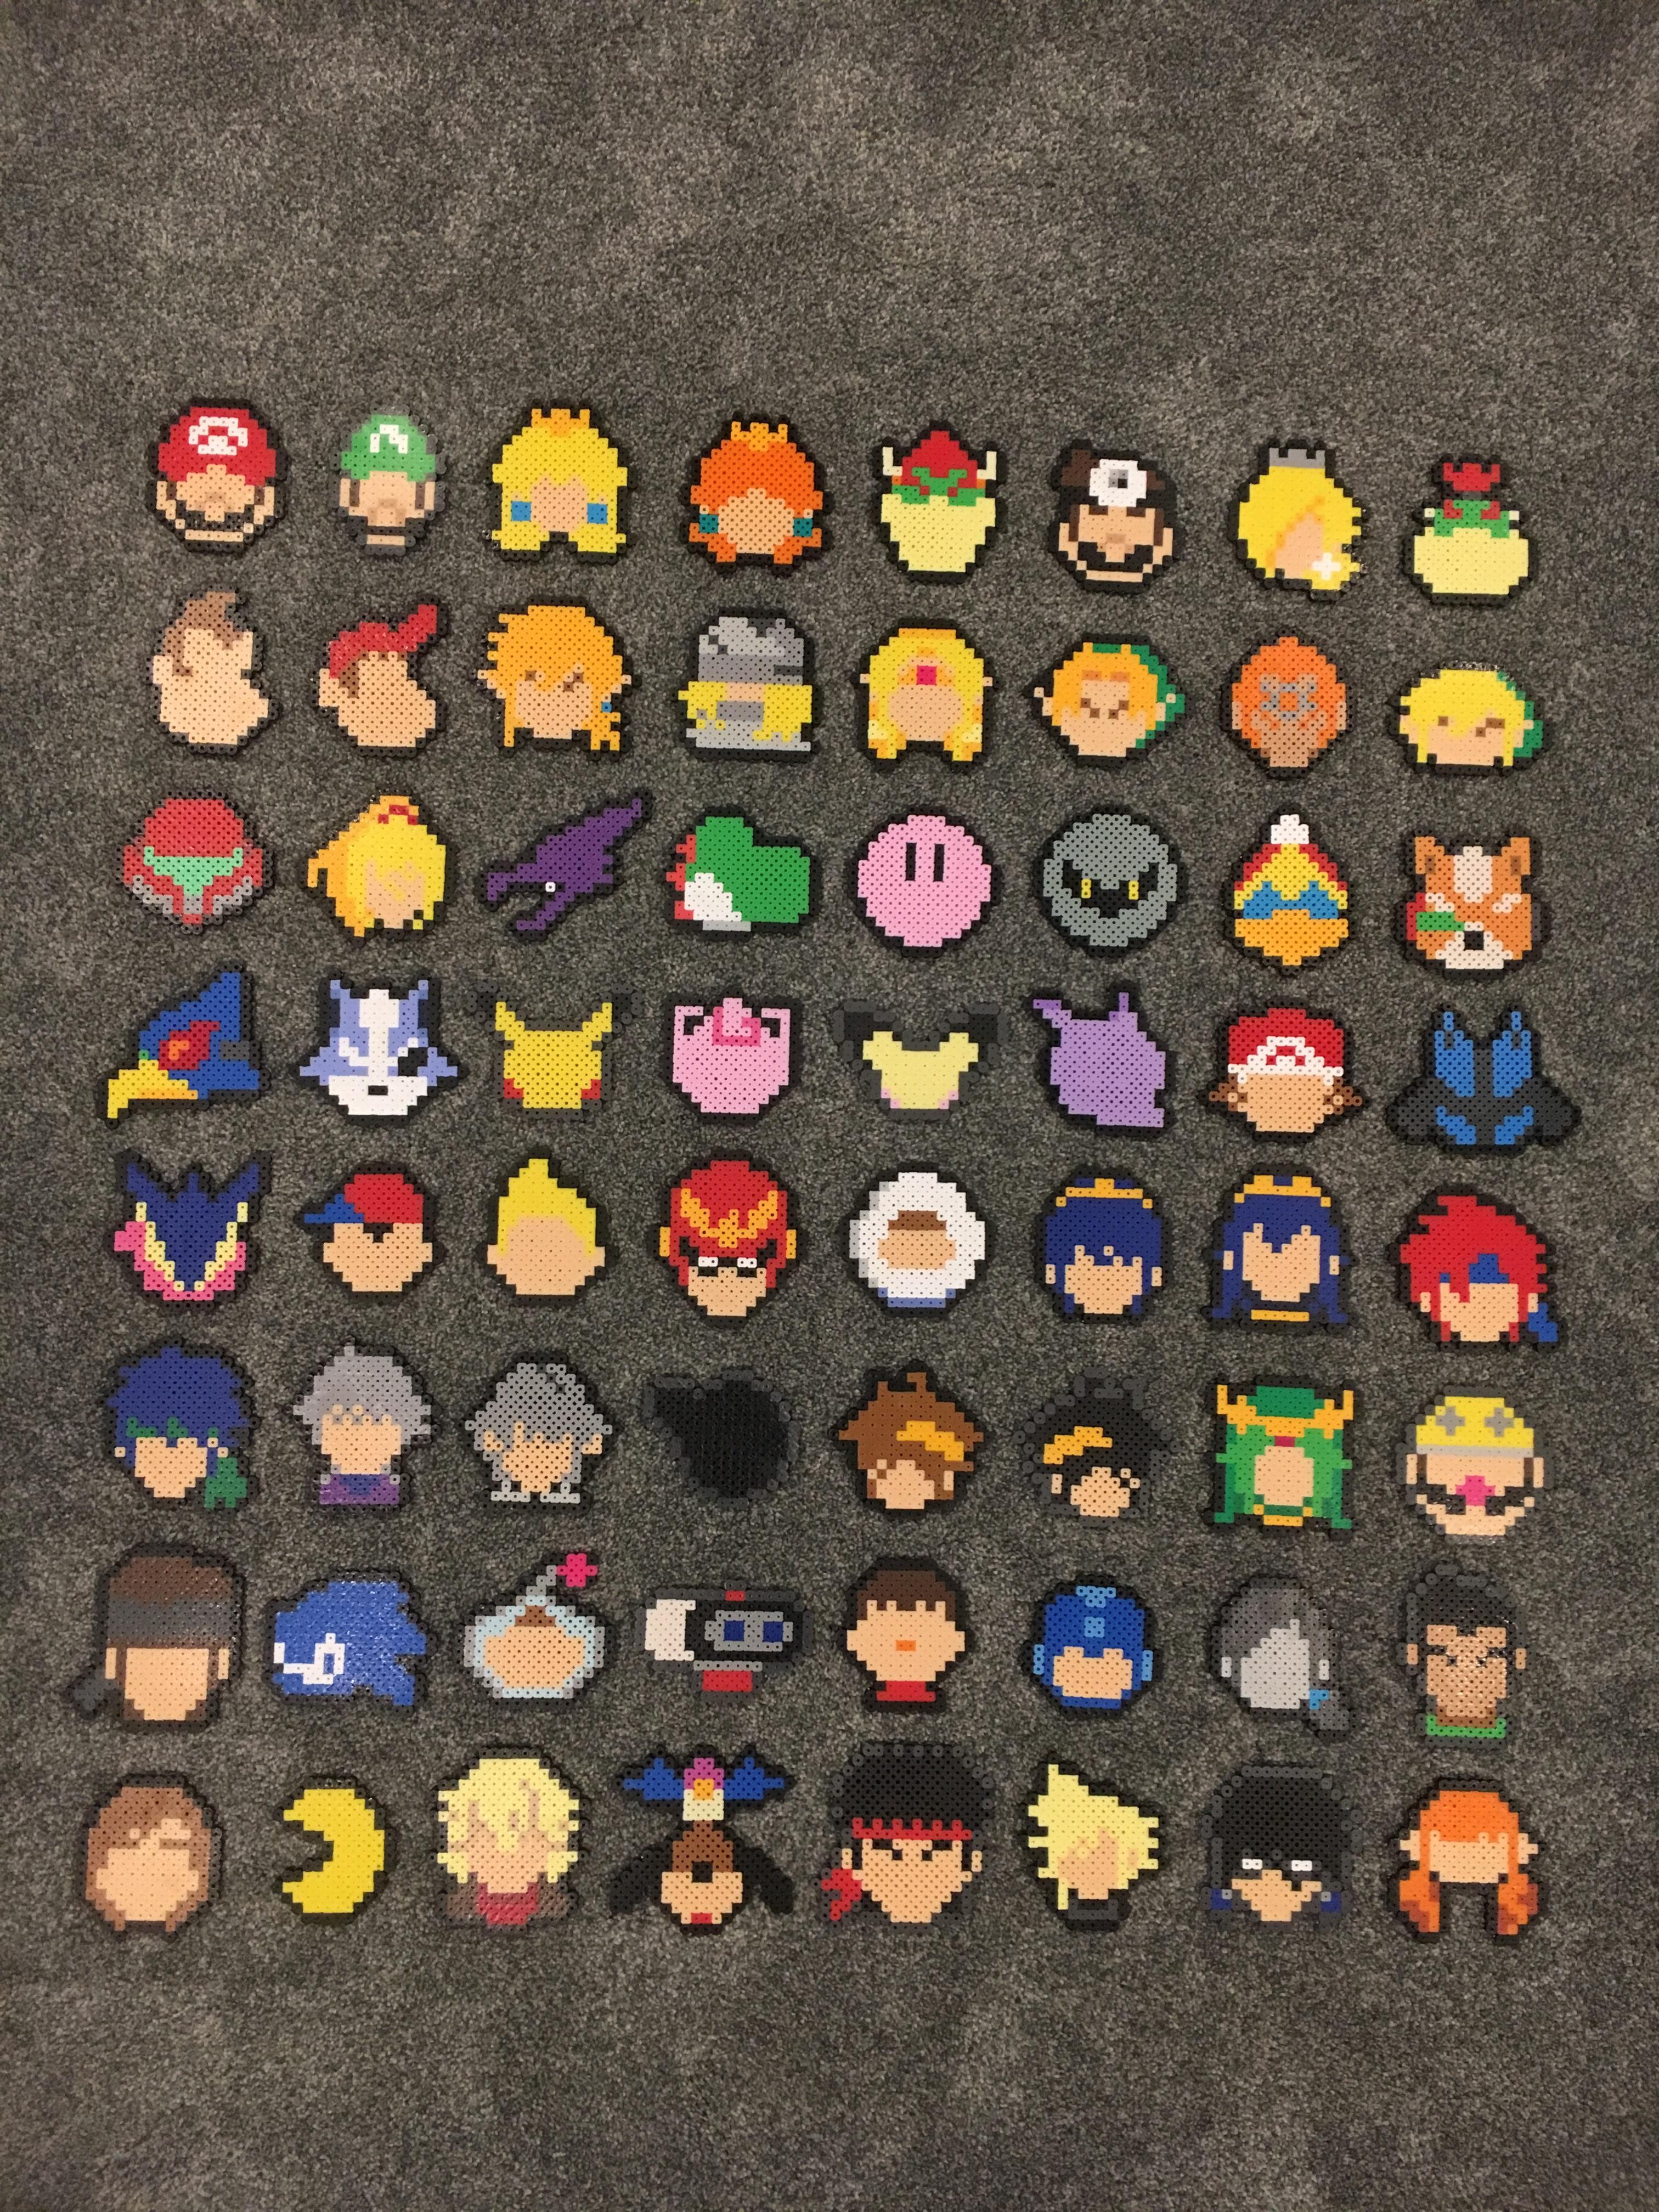 Smash Bros Ultimate Icon At Collection Of Smash Bros Ultimate Icon Free For 9605